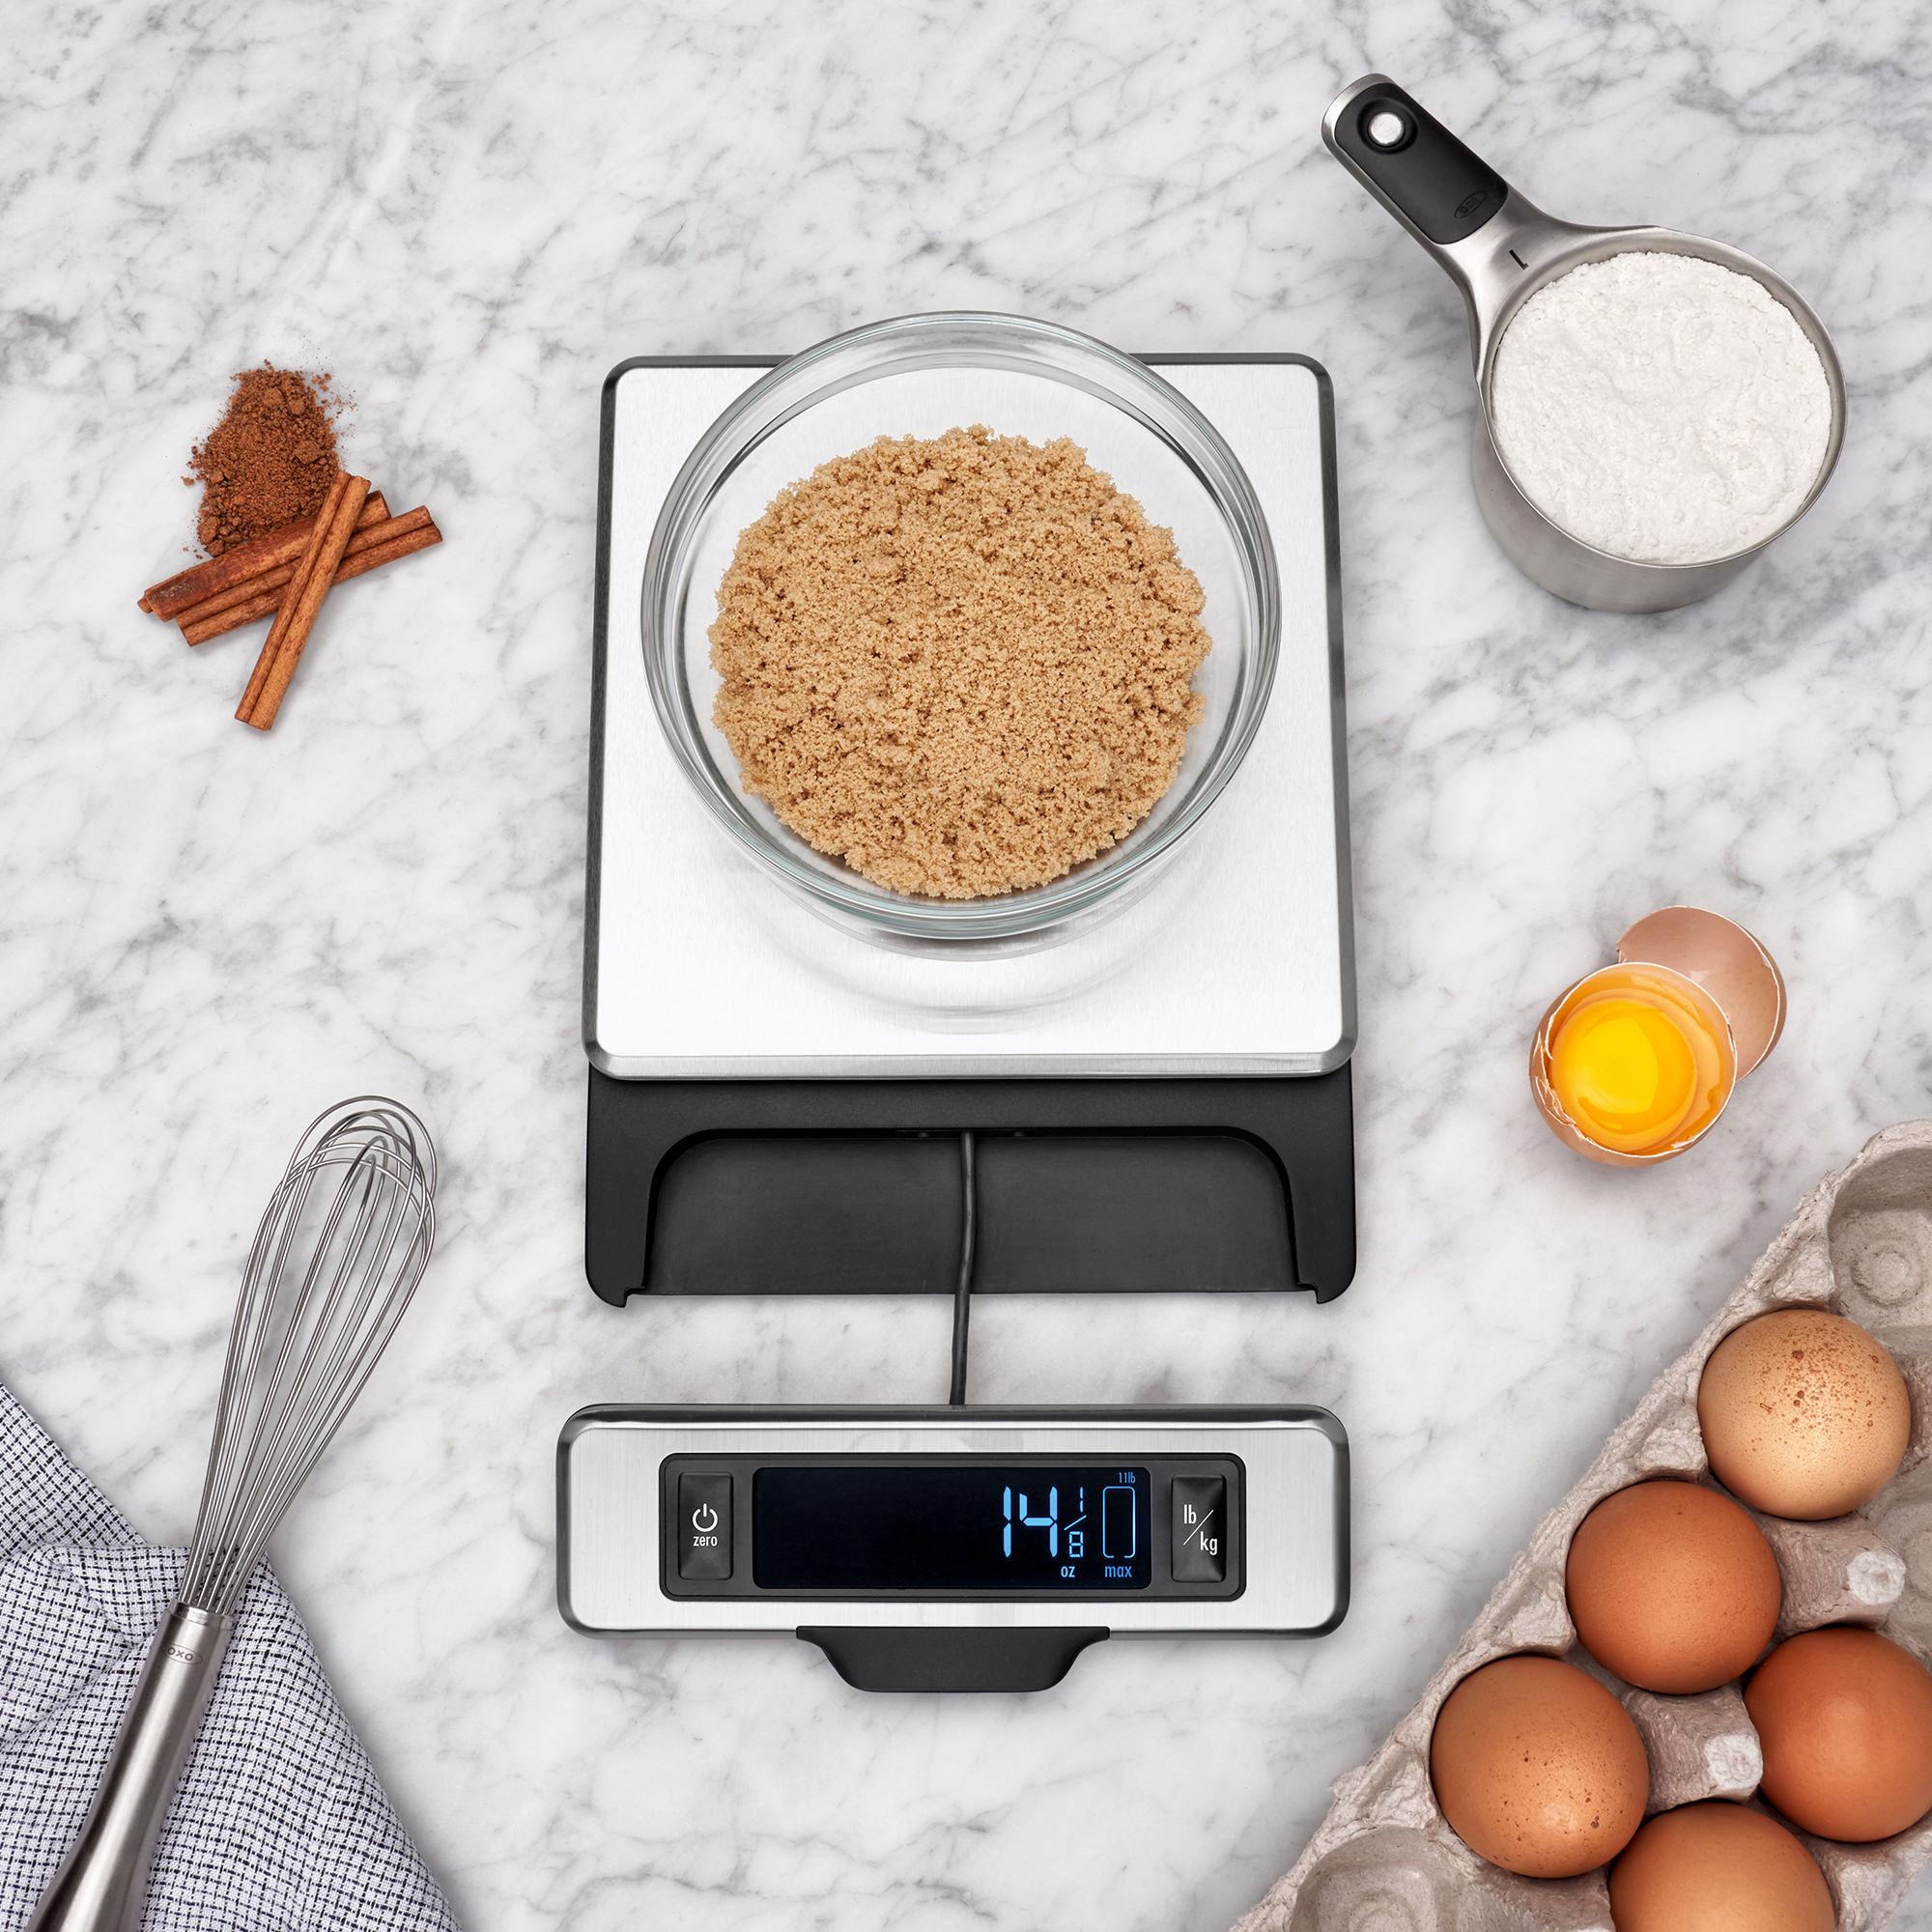 OXO Good Grips Stainless Steel Food Scale with Pull Out Display 5kg Image 3